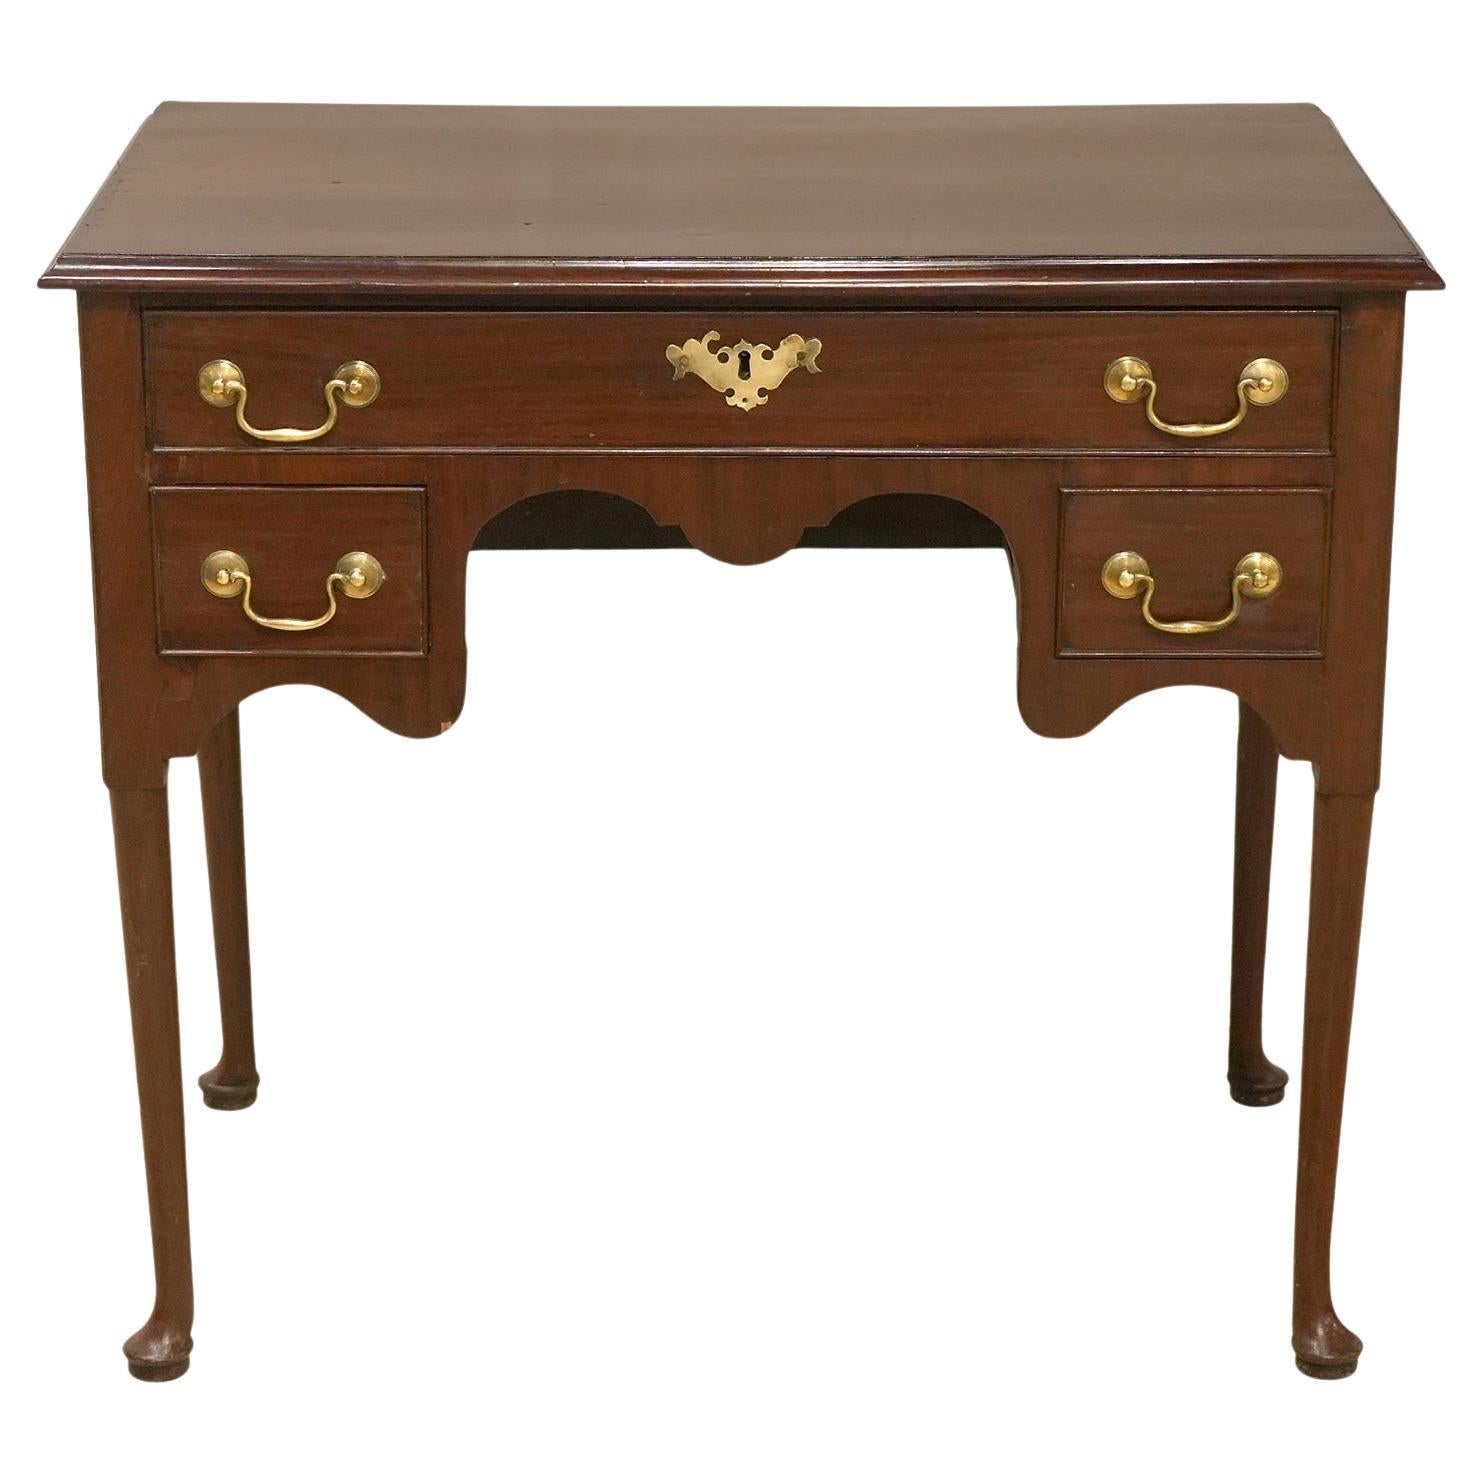 English Mahogany Queen Anne Style Lowboy or Dressing Table